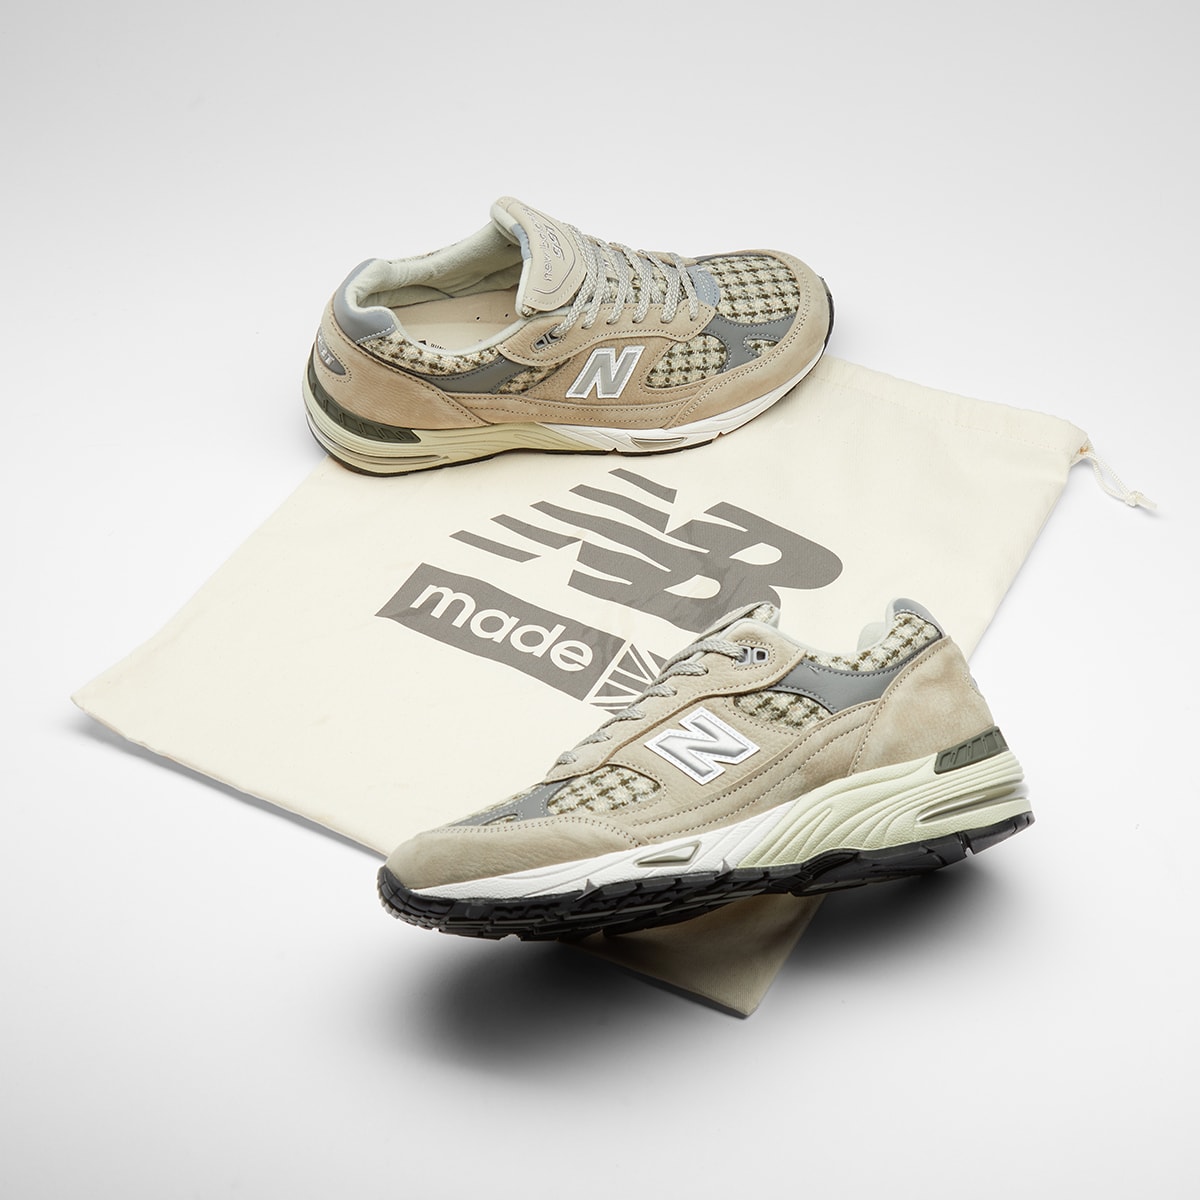 New Balance M991HT - Made in England (Beige Harris Tweed) | END